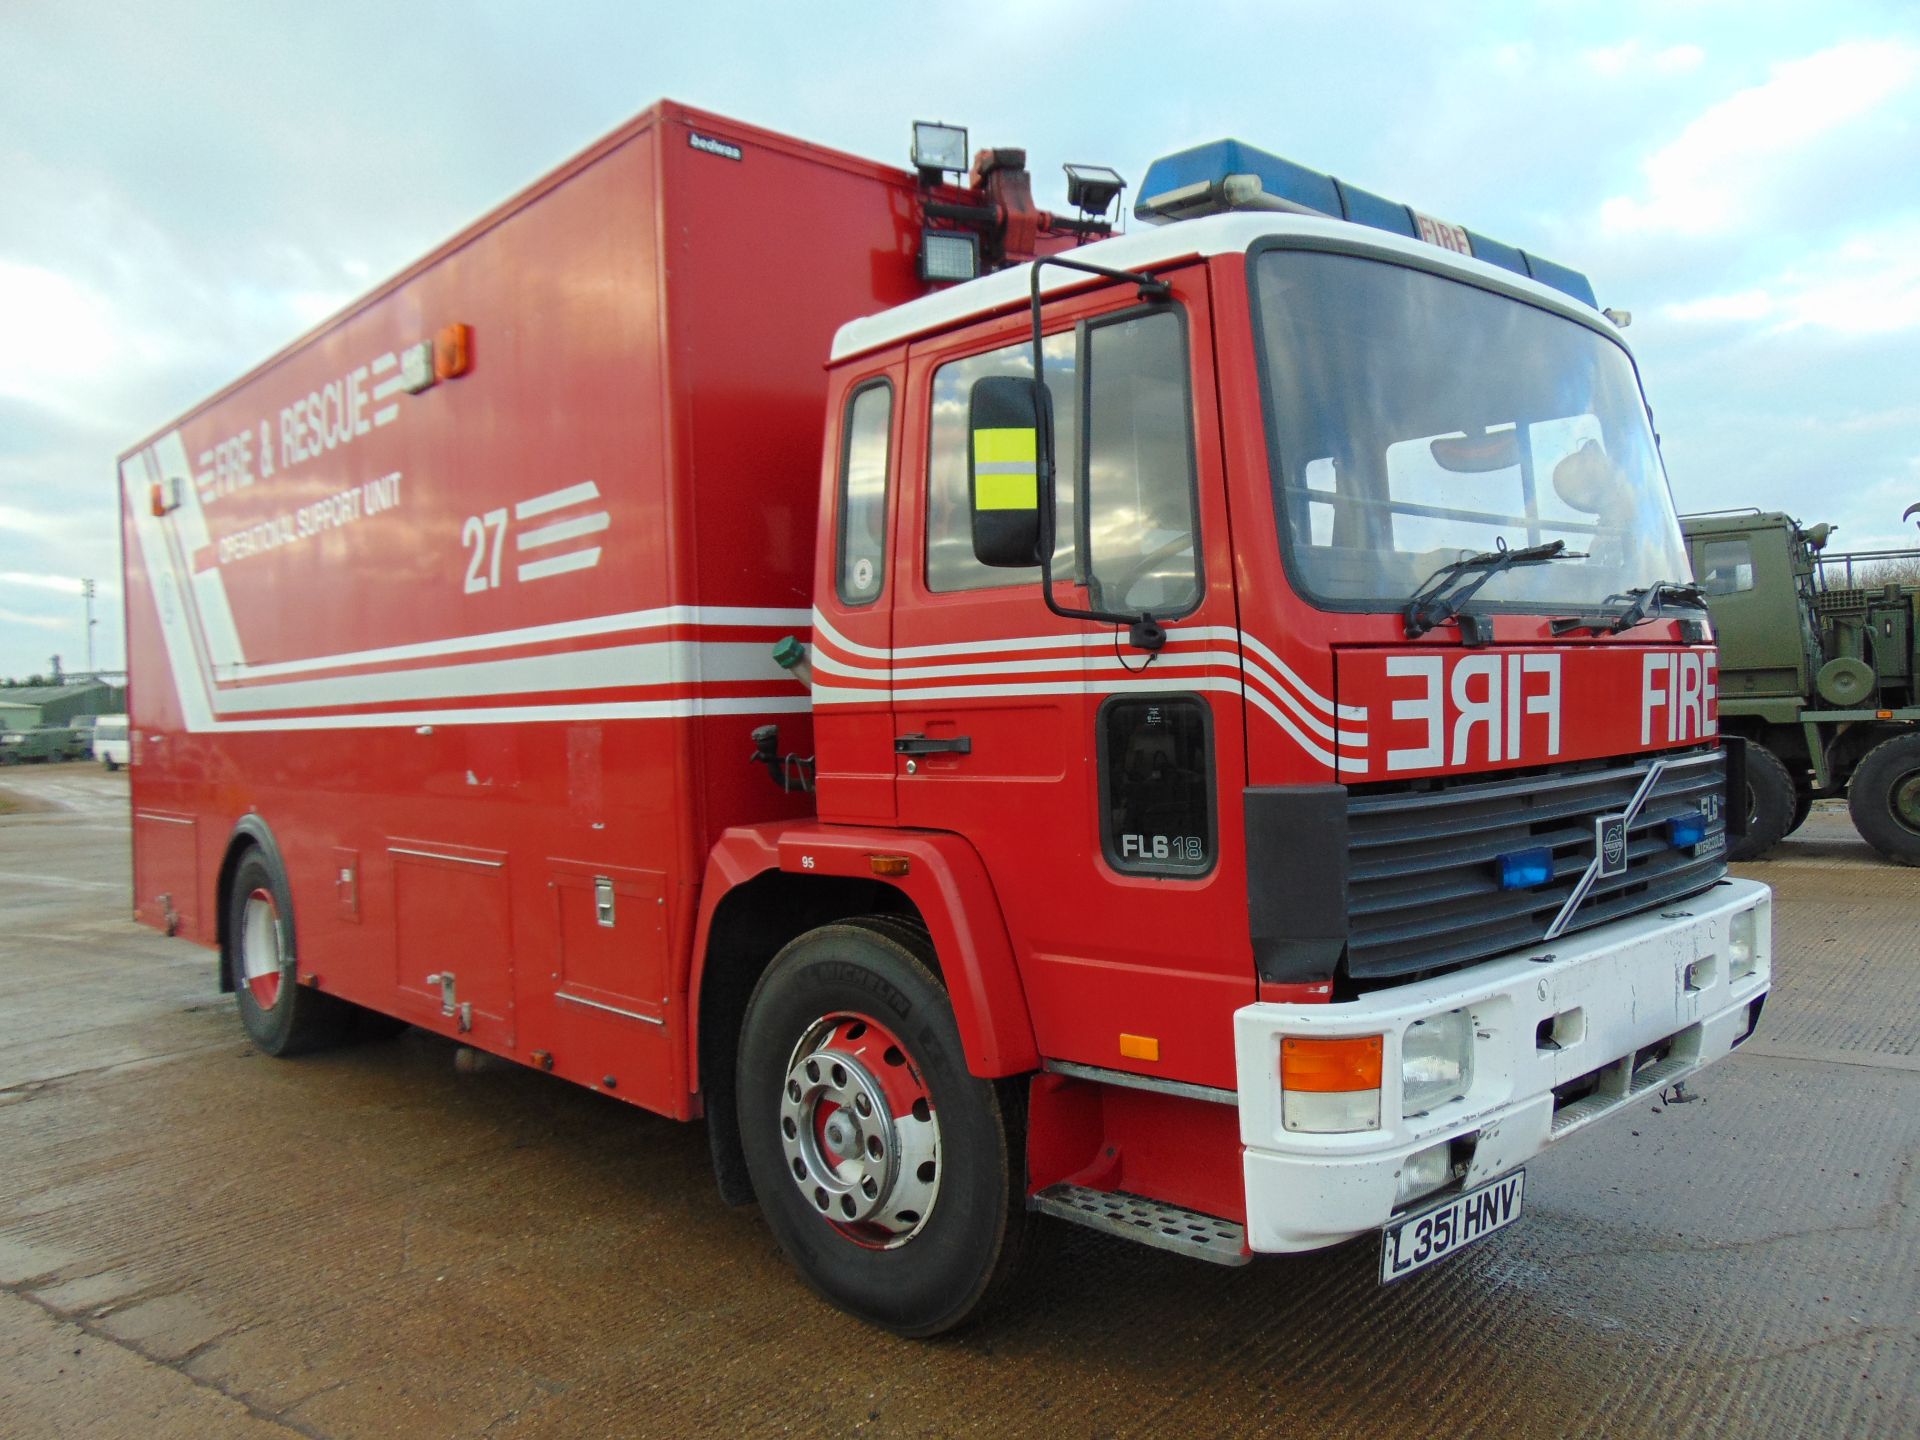 1993 Volvo FL6 18 4 x 2 Incident Response Unit complete with a 1000 Kg Tail Lift